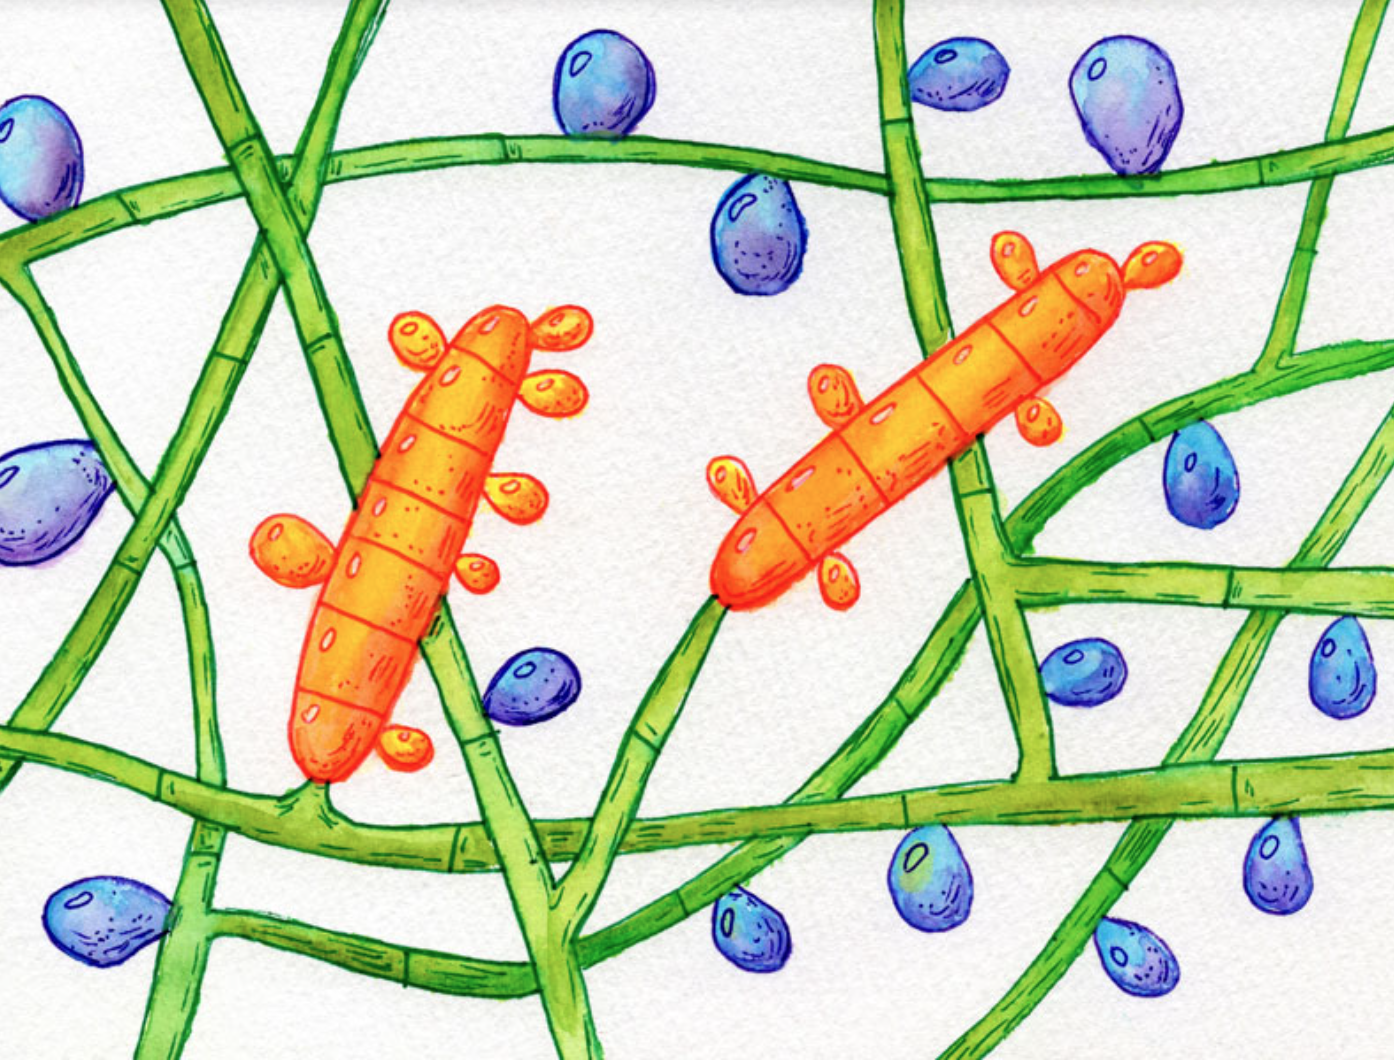 an illustration showing colorful microbes